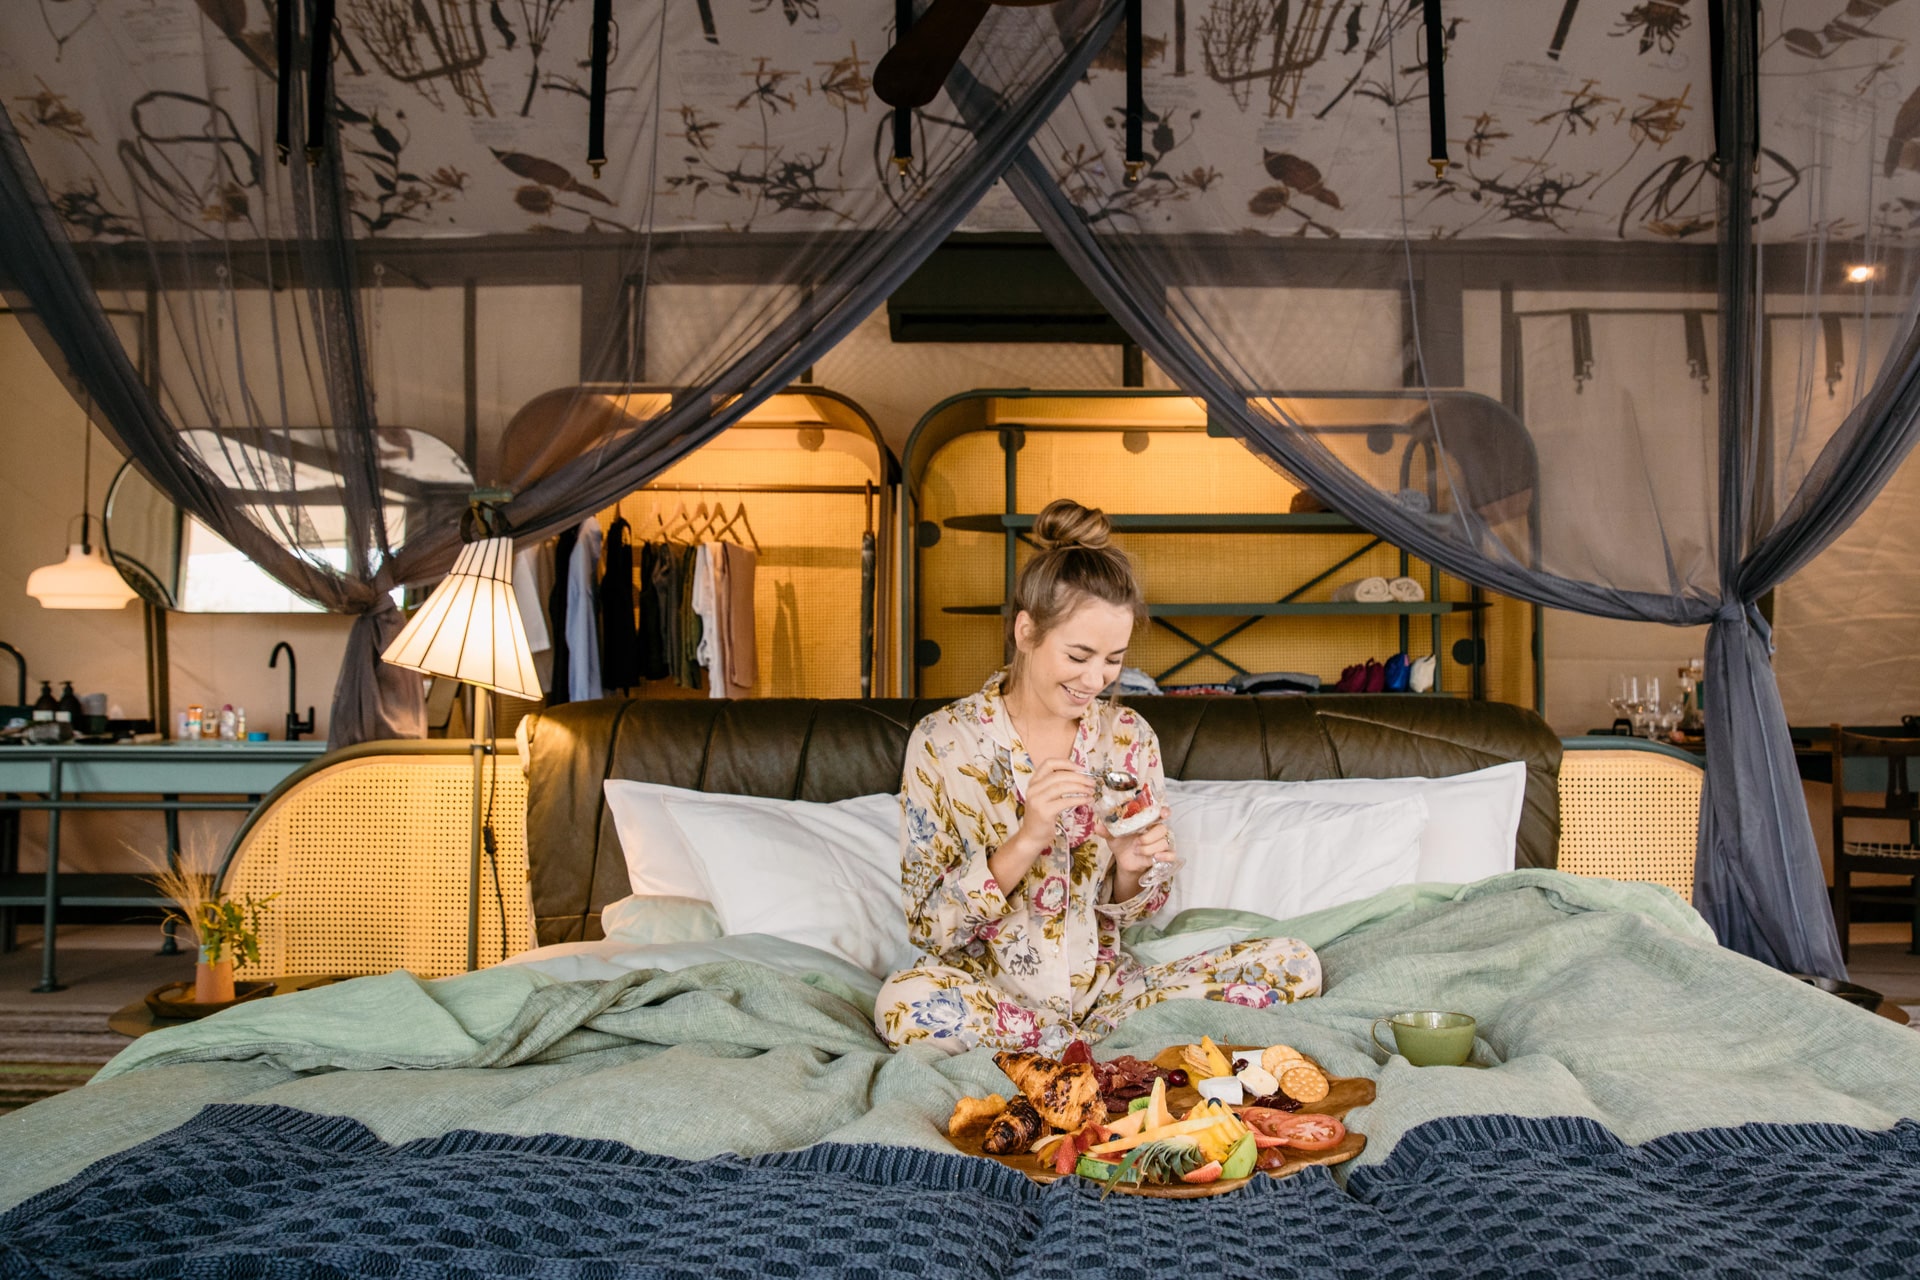 Enjoy a hearty breakfast at Saseka Tented Camp - a lodge perfect for a stay during Christmas in South Africa.